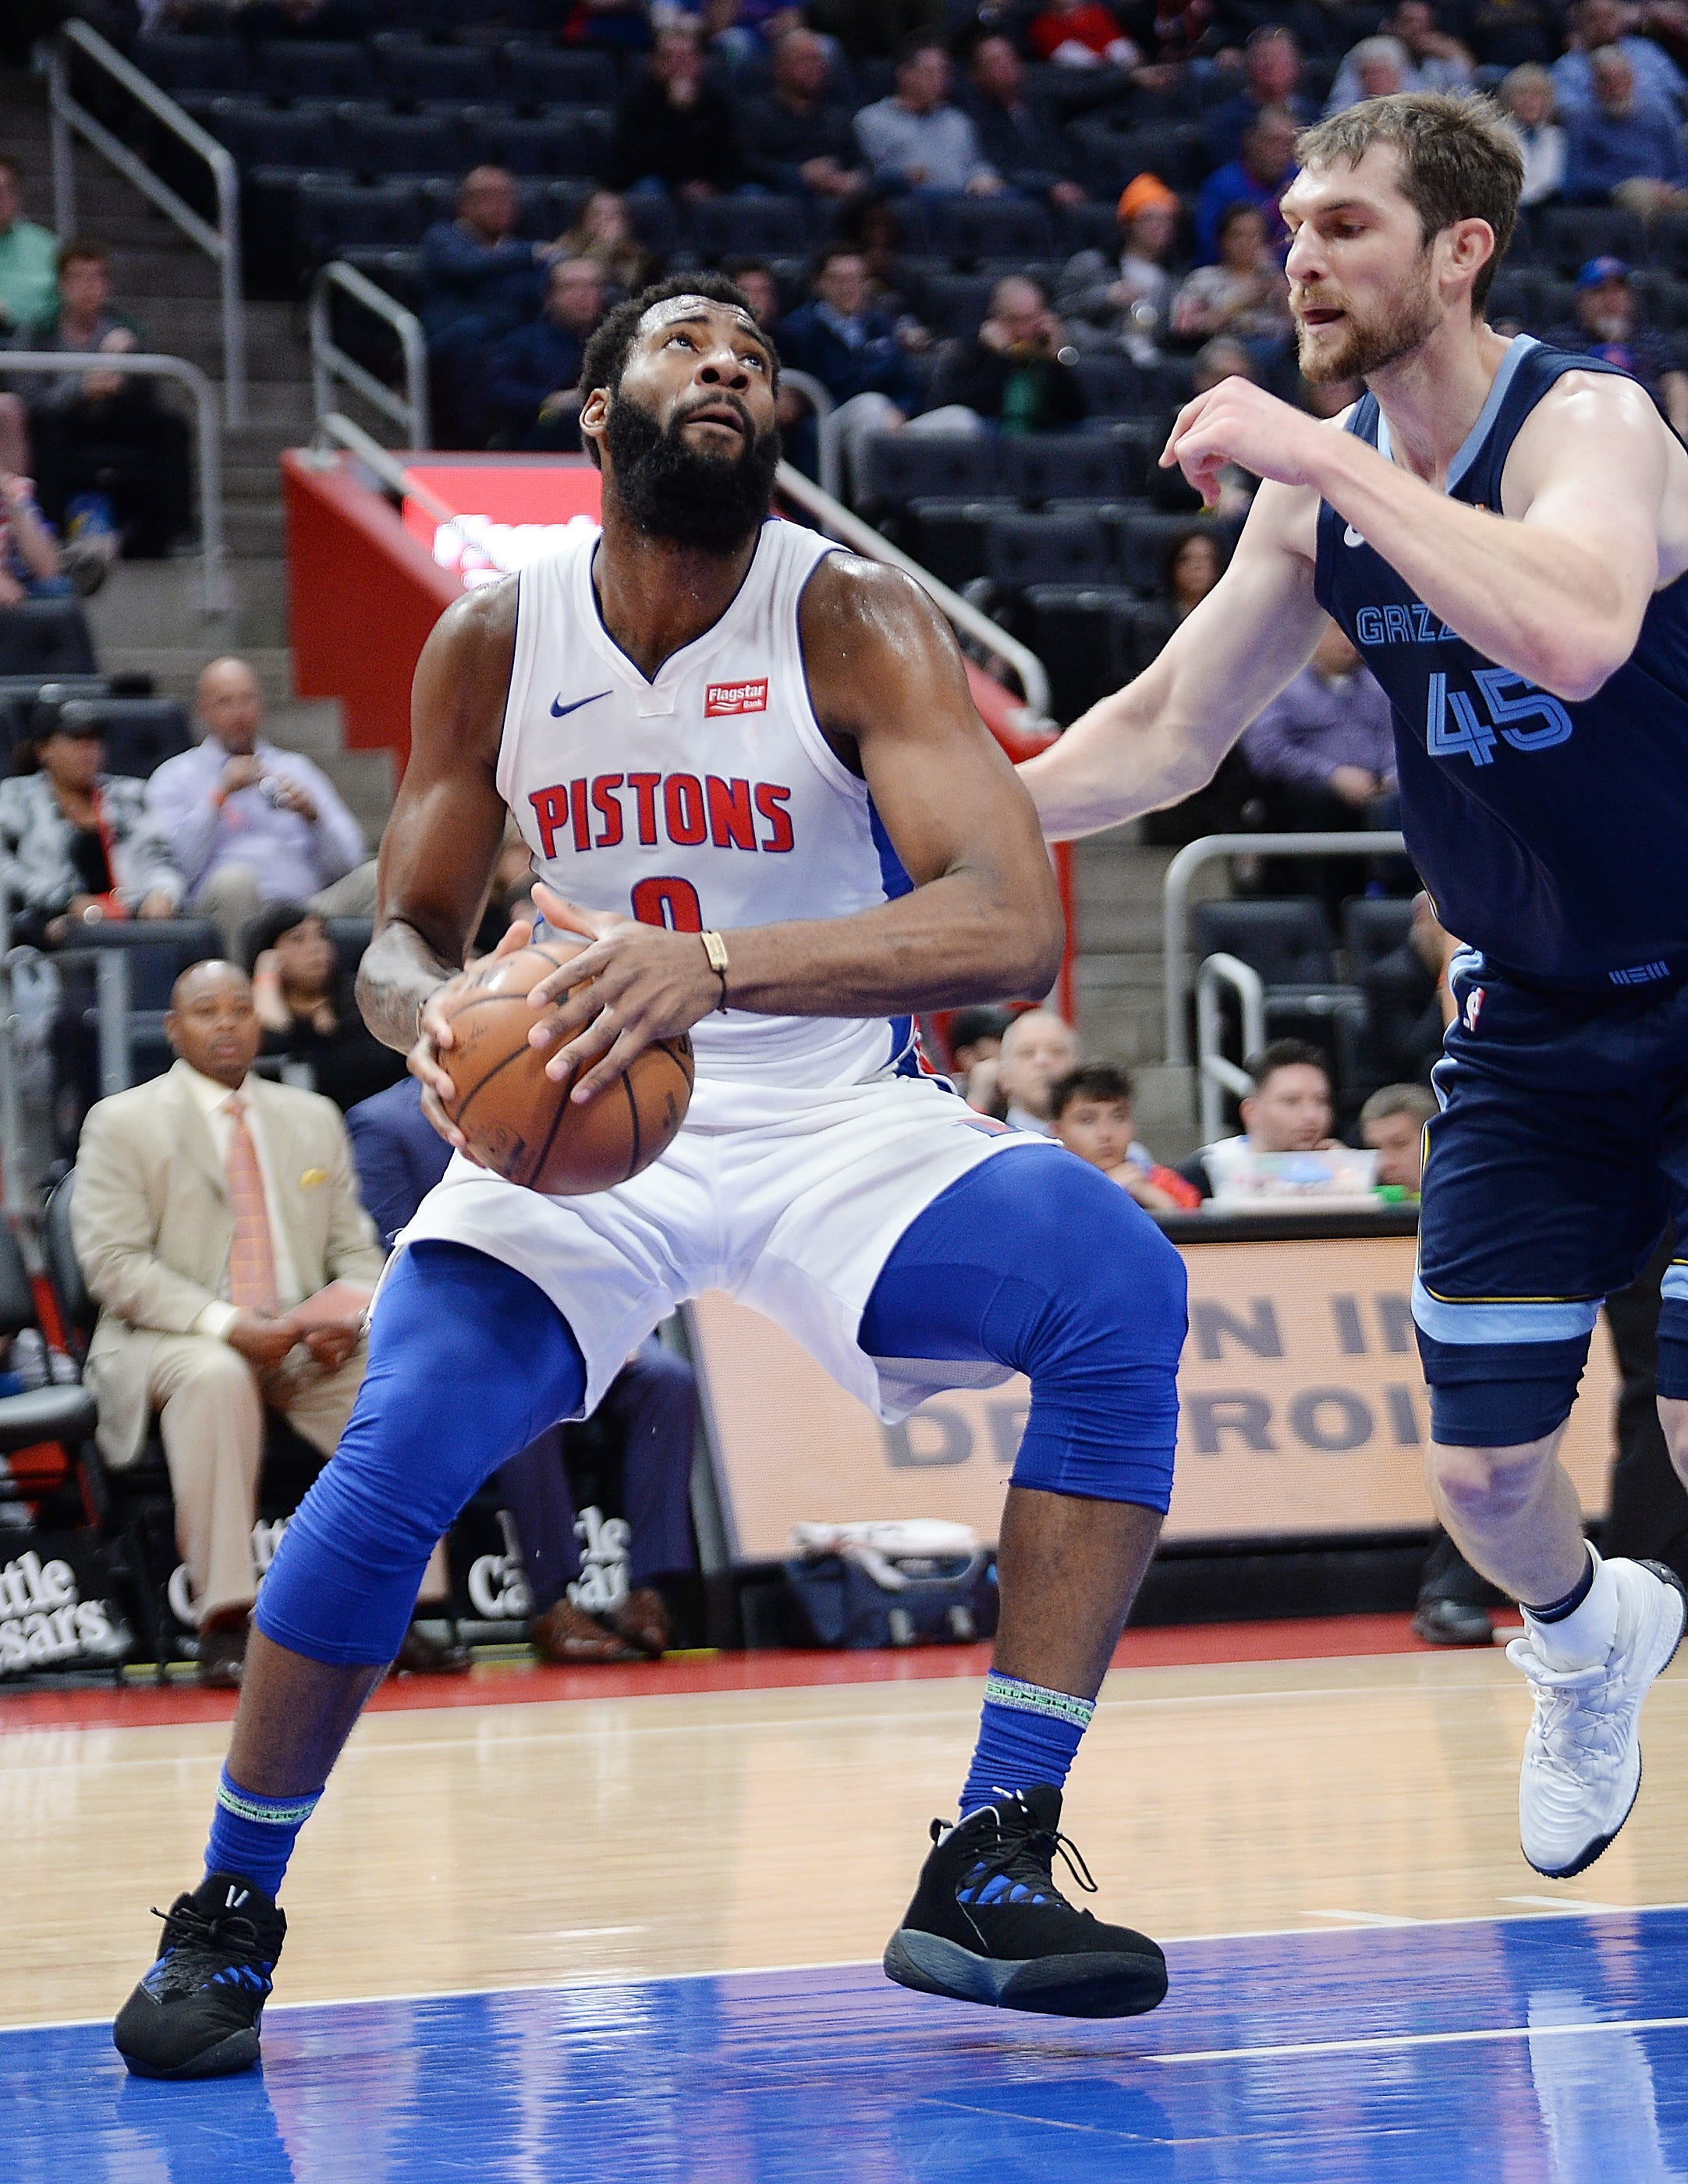 Pistons' Andre Drummond drives around Grizzlies' Tyler Zeller in the first quarter.